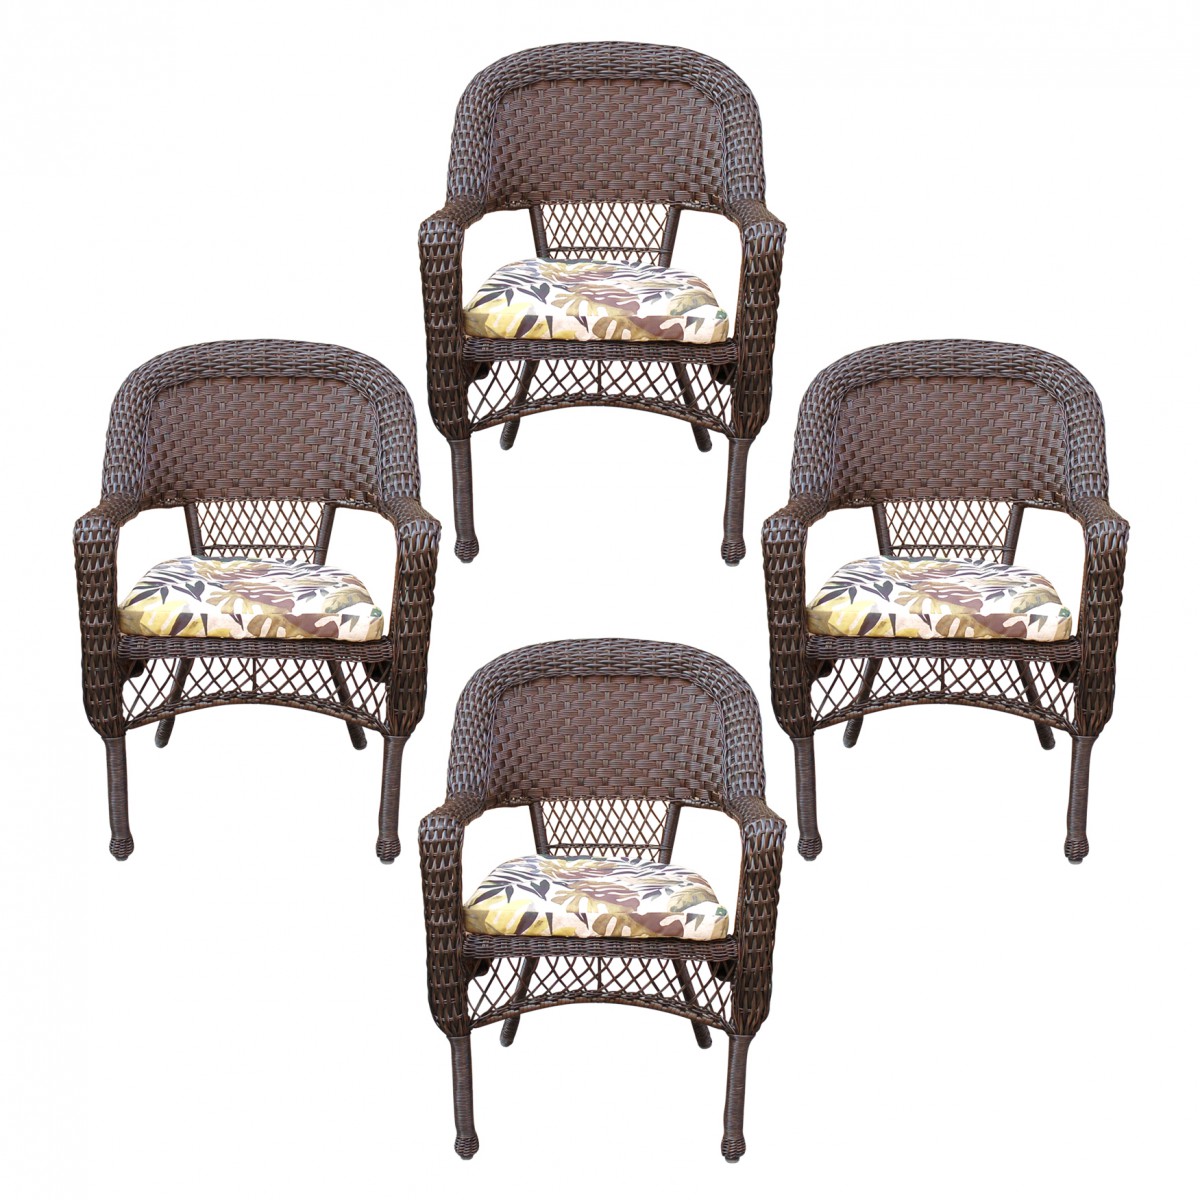 Resin wicker dining chair with florals cushion-set of 4